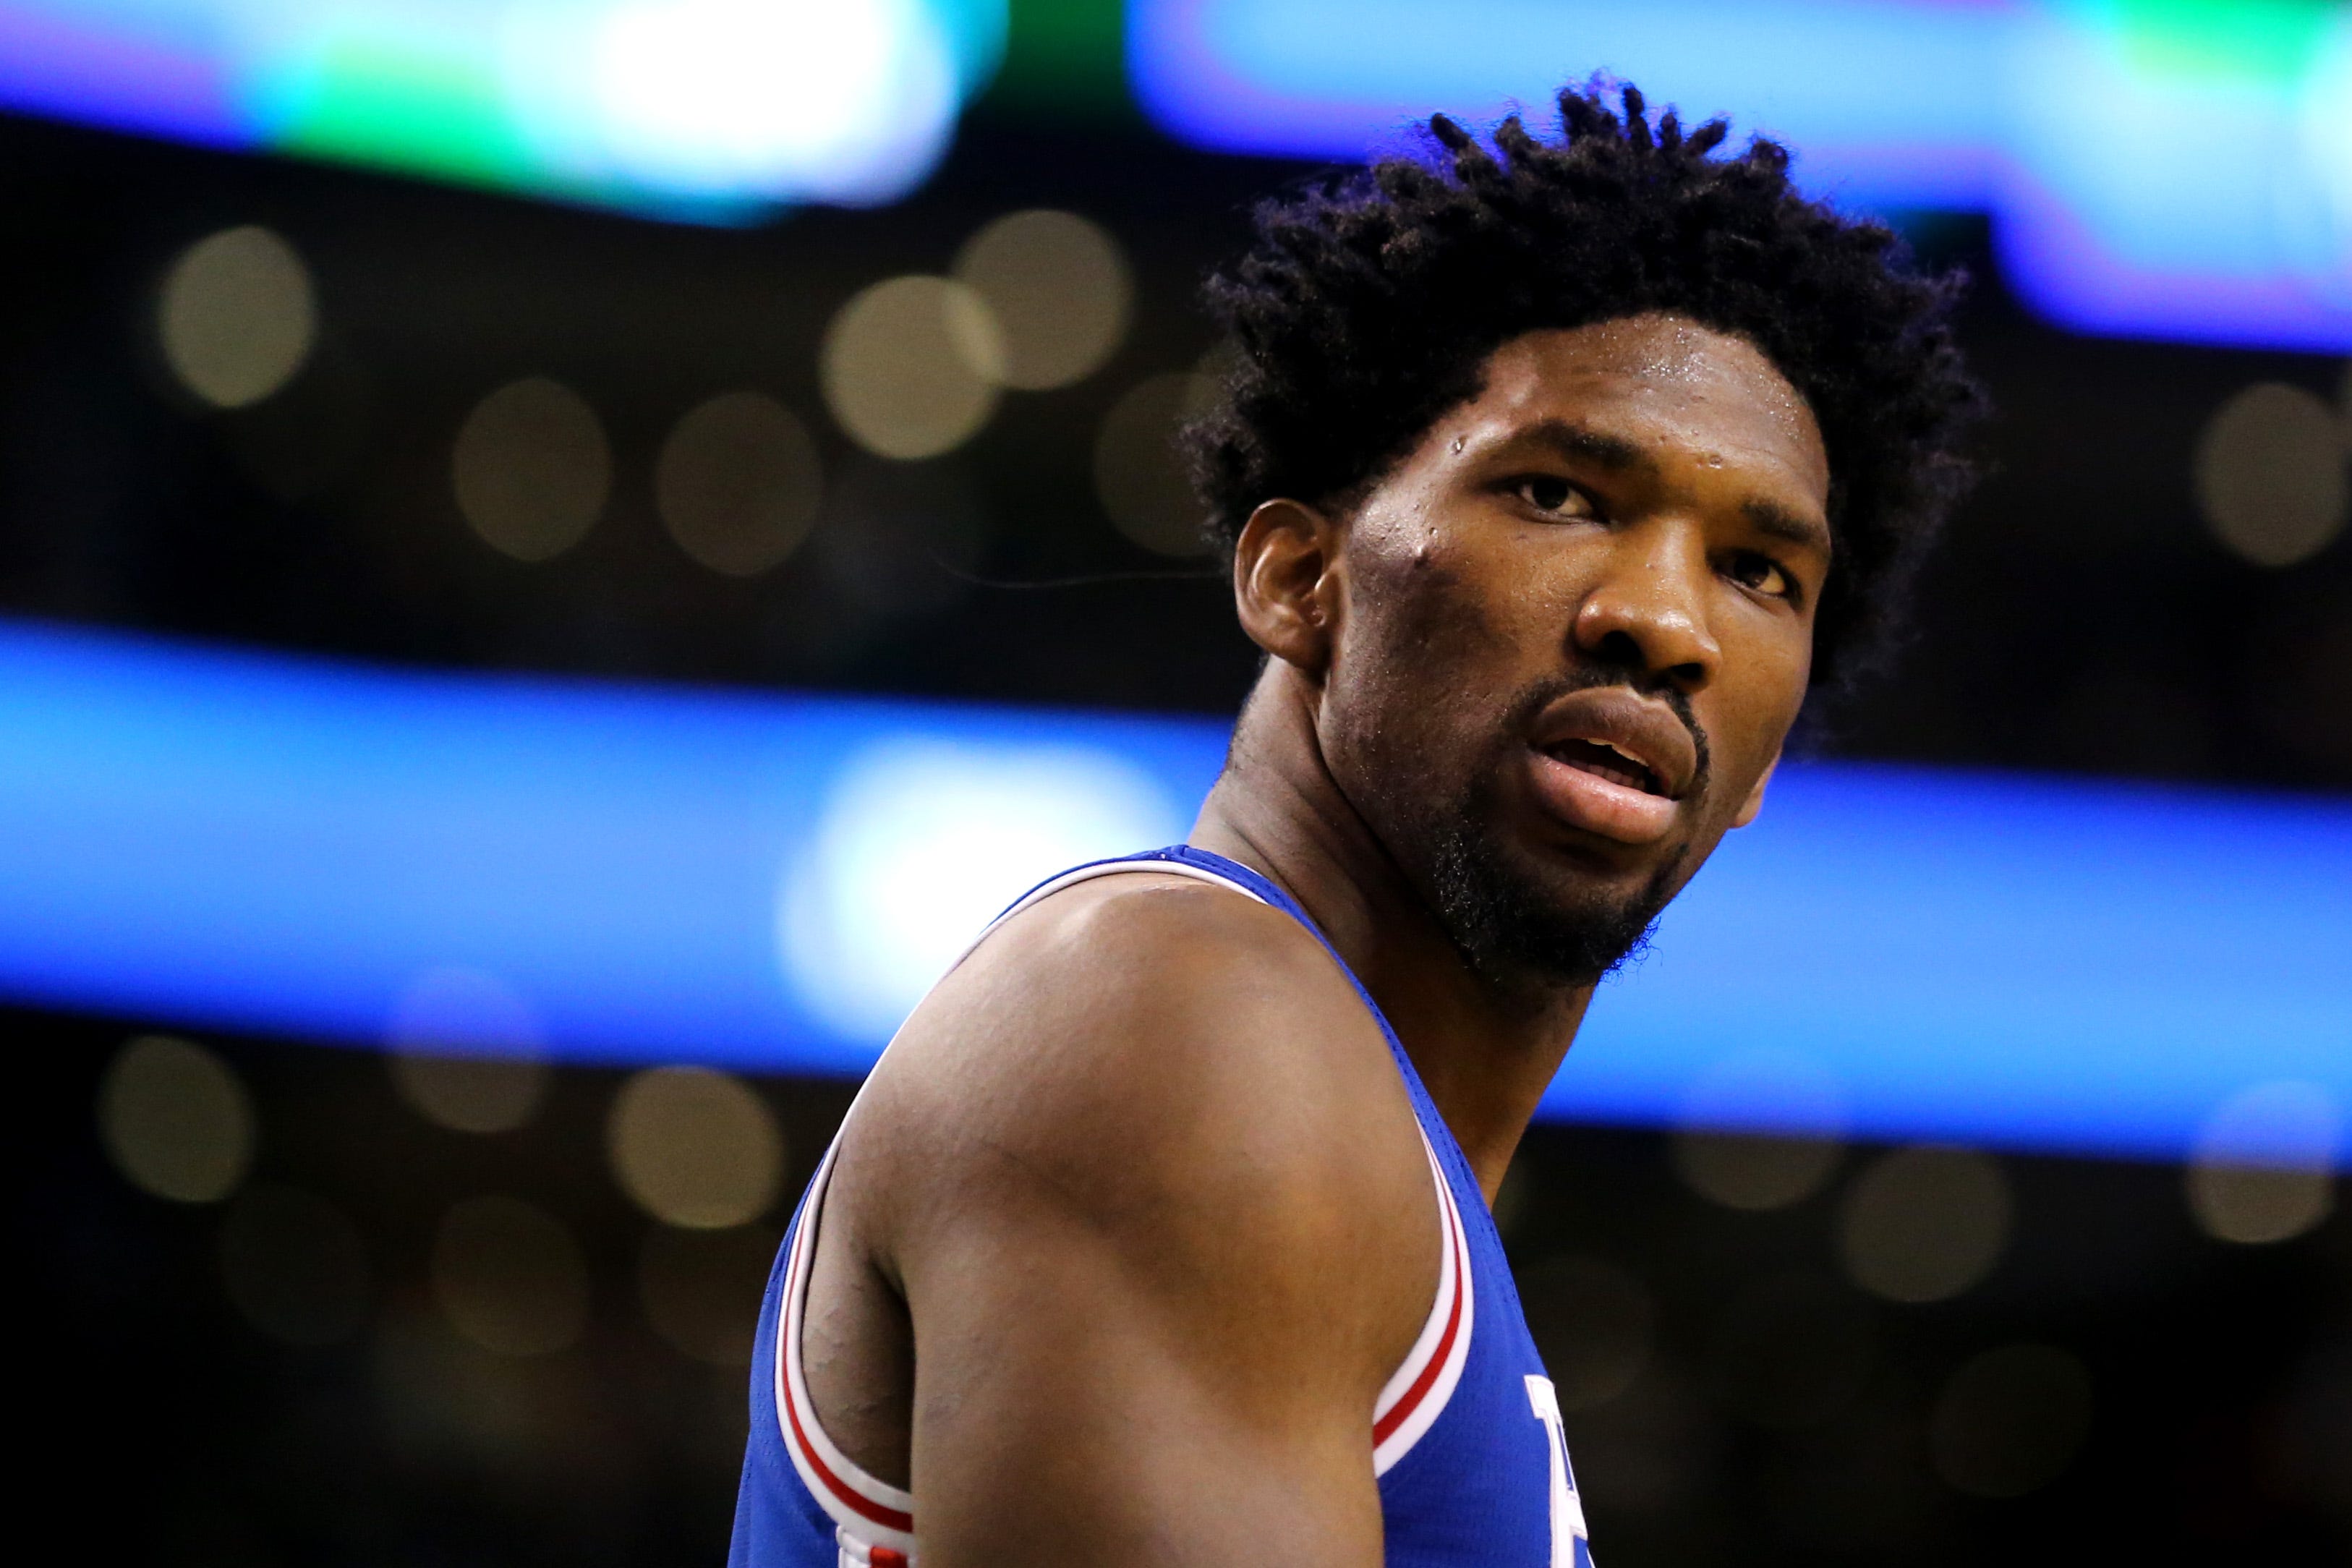 Week 11 NBA Rookie of the Year race: Do you trust the process yet?